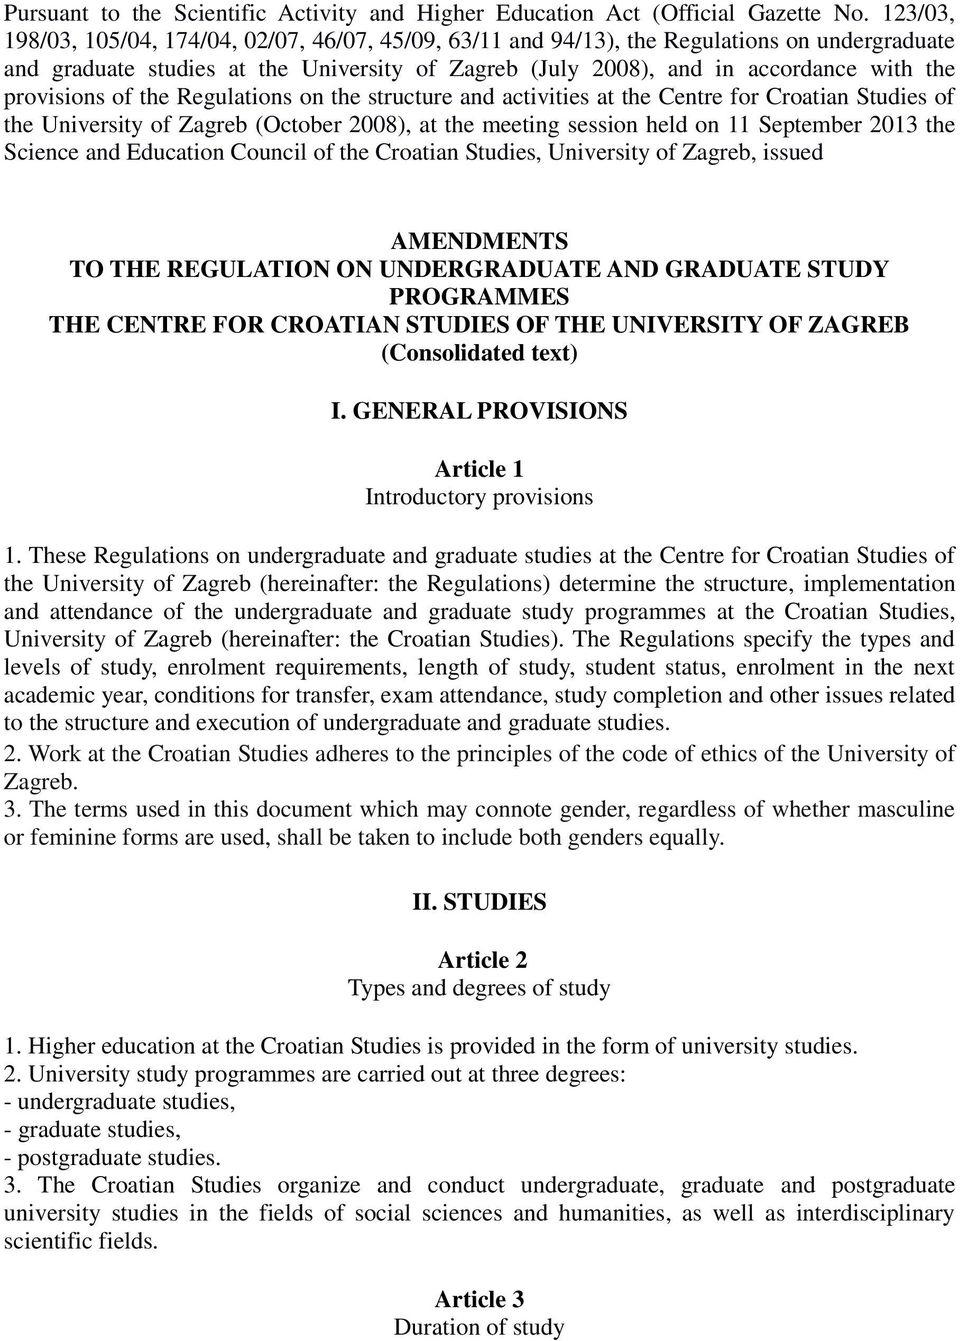 provisions of the Regulations on the structure and activities at the Centre for Croatian Studies of the University of Zagreb (October 2008), at the meeting session held on 11 September 2013 the